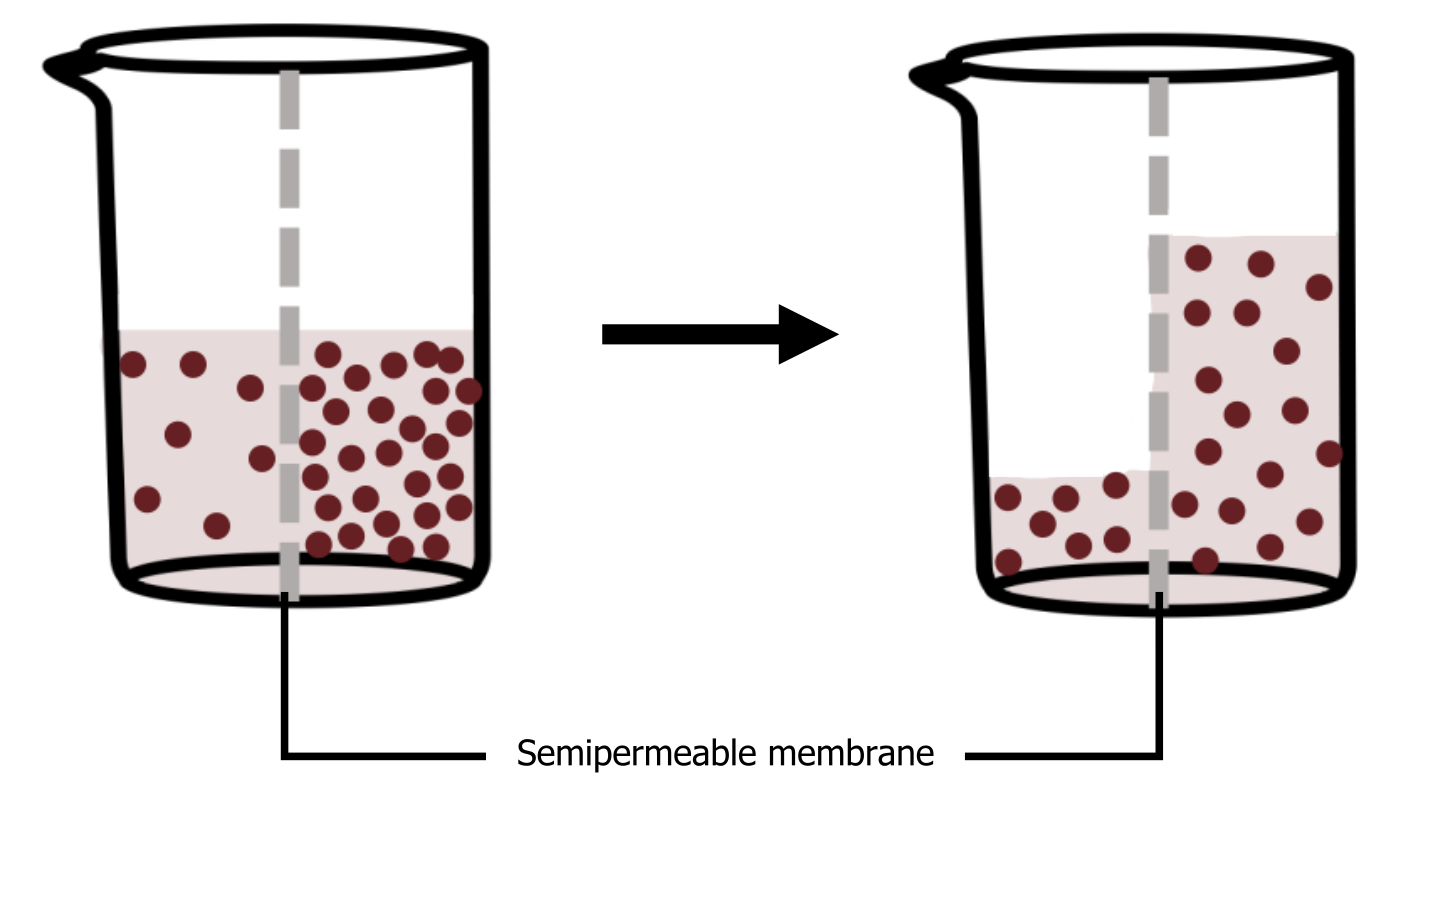 Beaker with a semi permeable membrane dividing it in half vertically. There is an equal amount of liquid in each half but the left has a lower concentration of particles than the right. Arrow to beaker with the left side having a third of the liquid as the right and both sides have equal concentrations of particles.